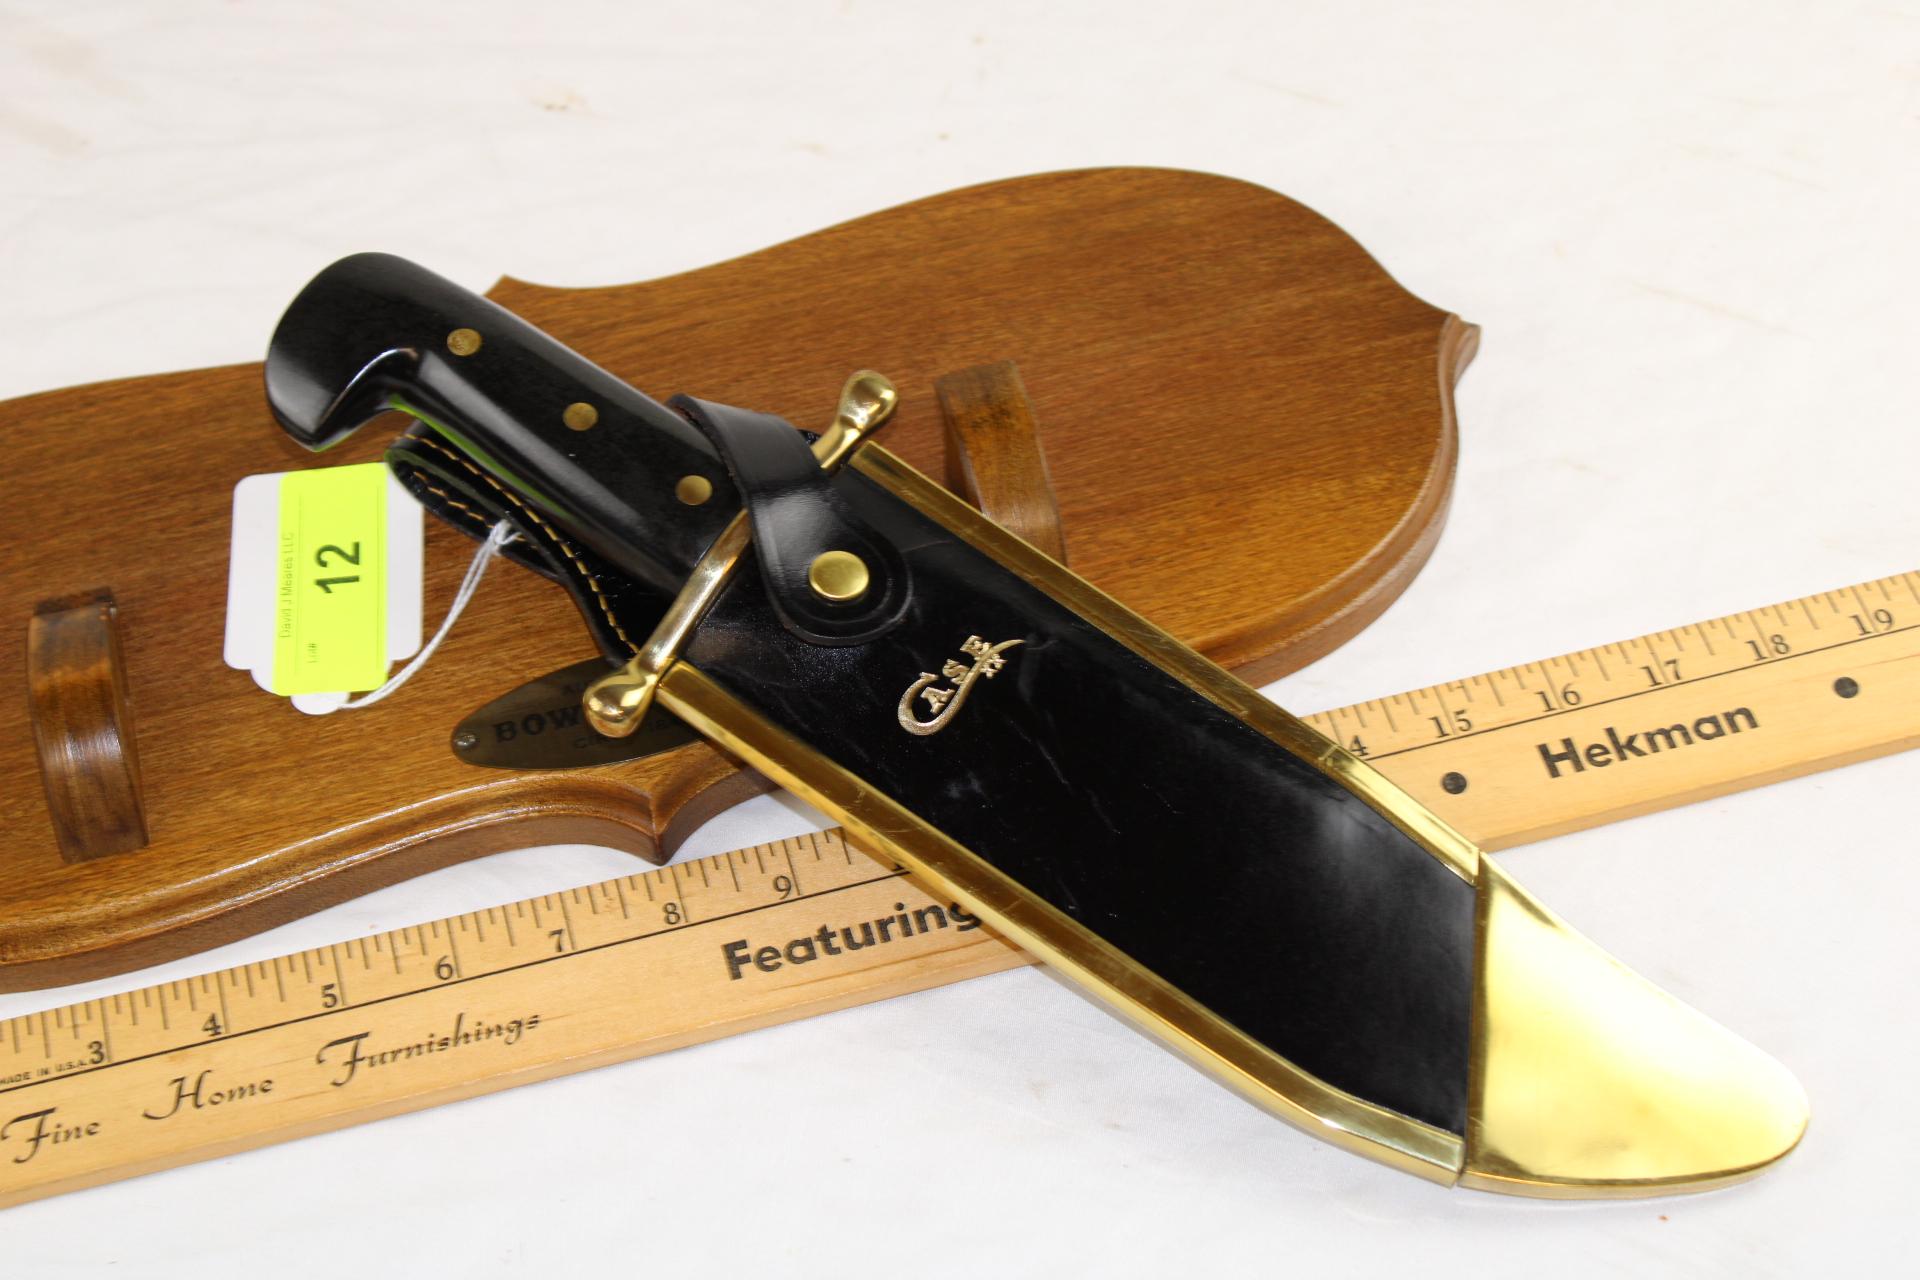 Case XX 1836 "Bowie Knife". Comes with Display and Sheath